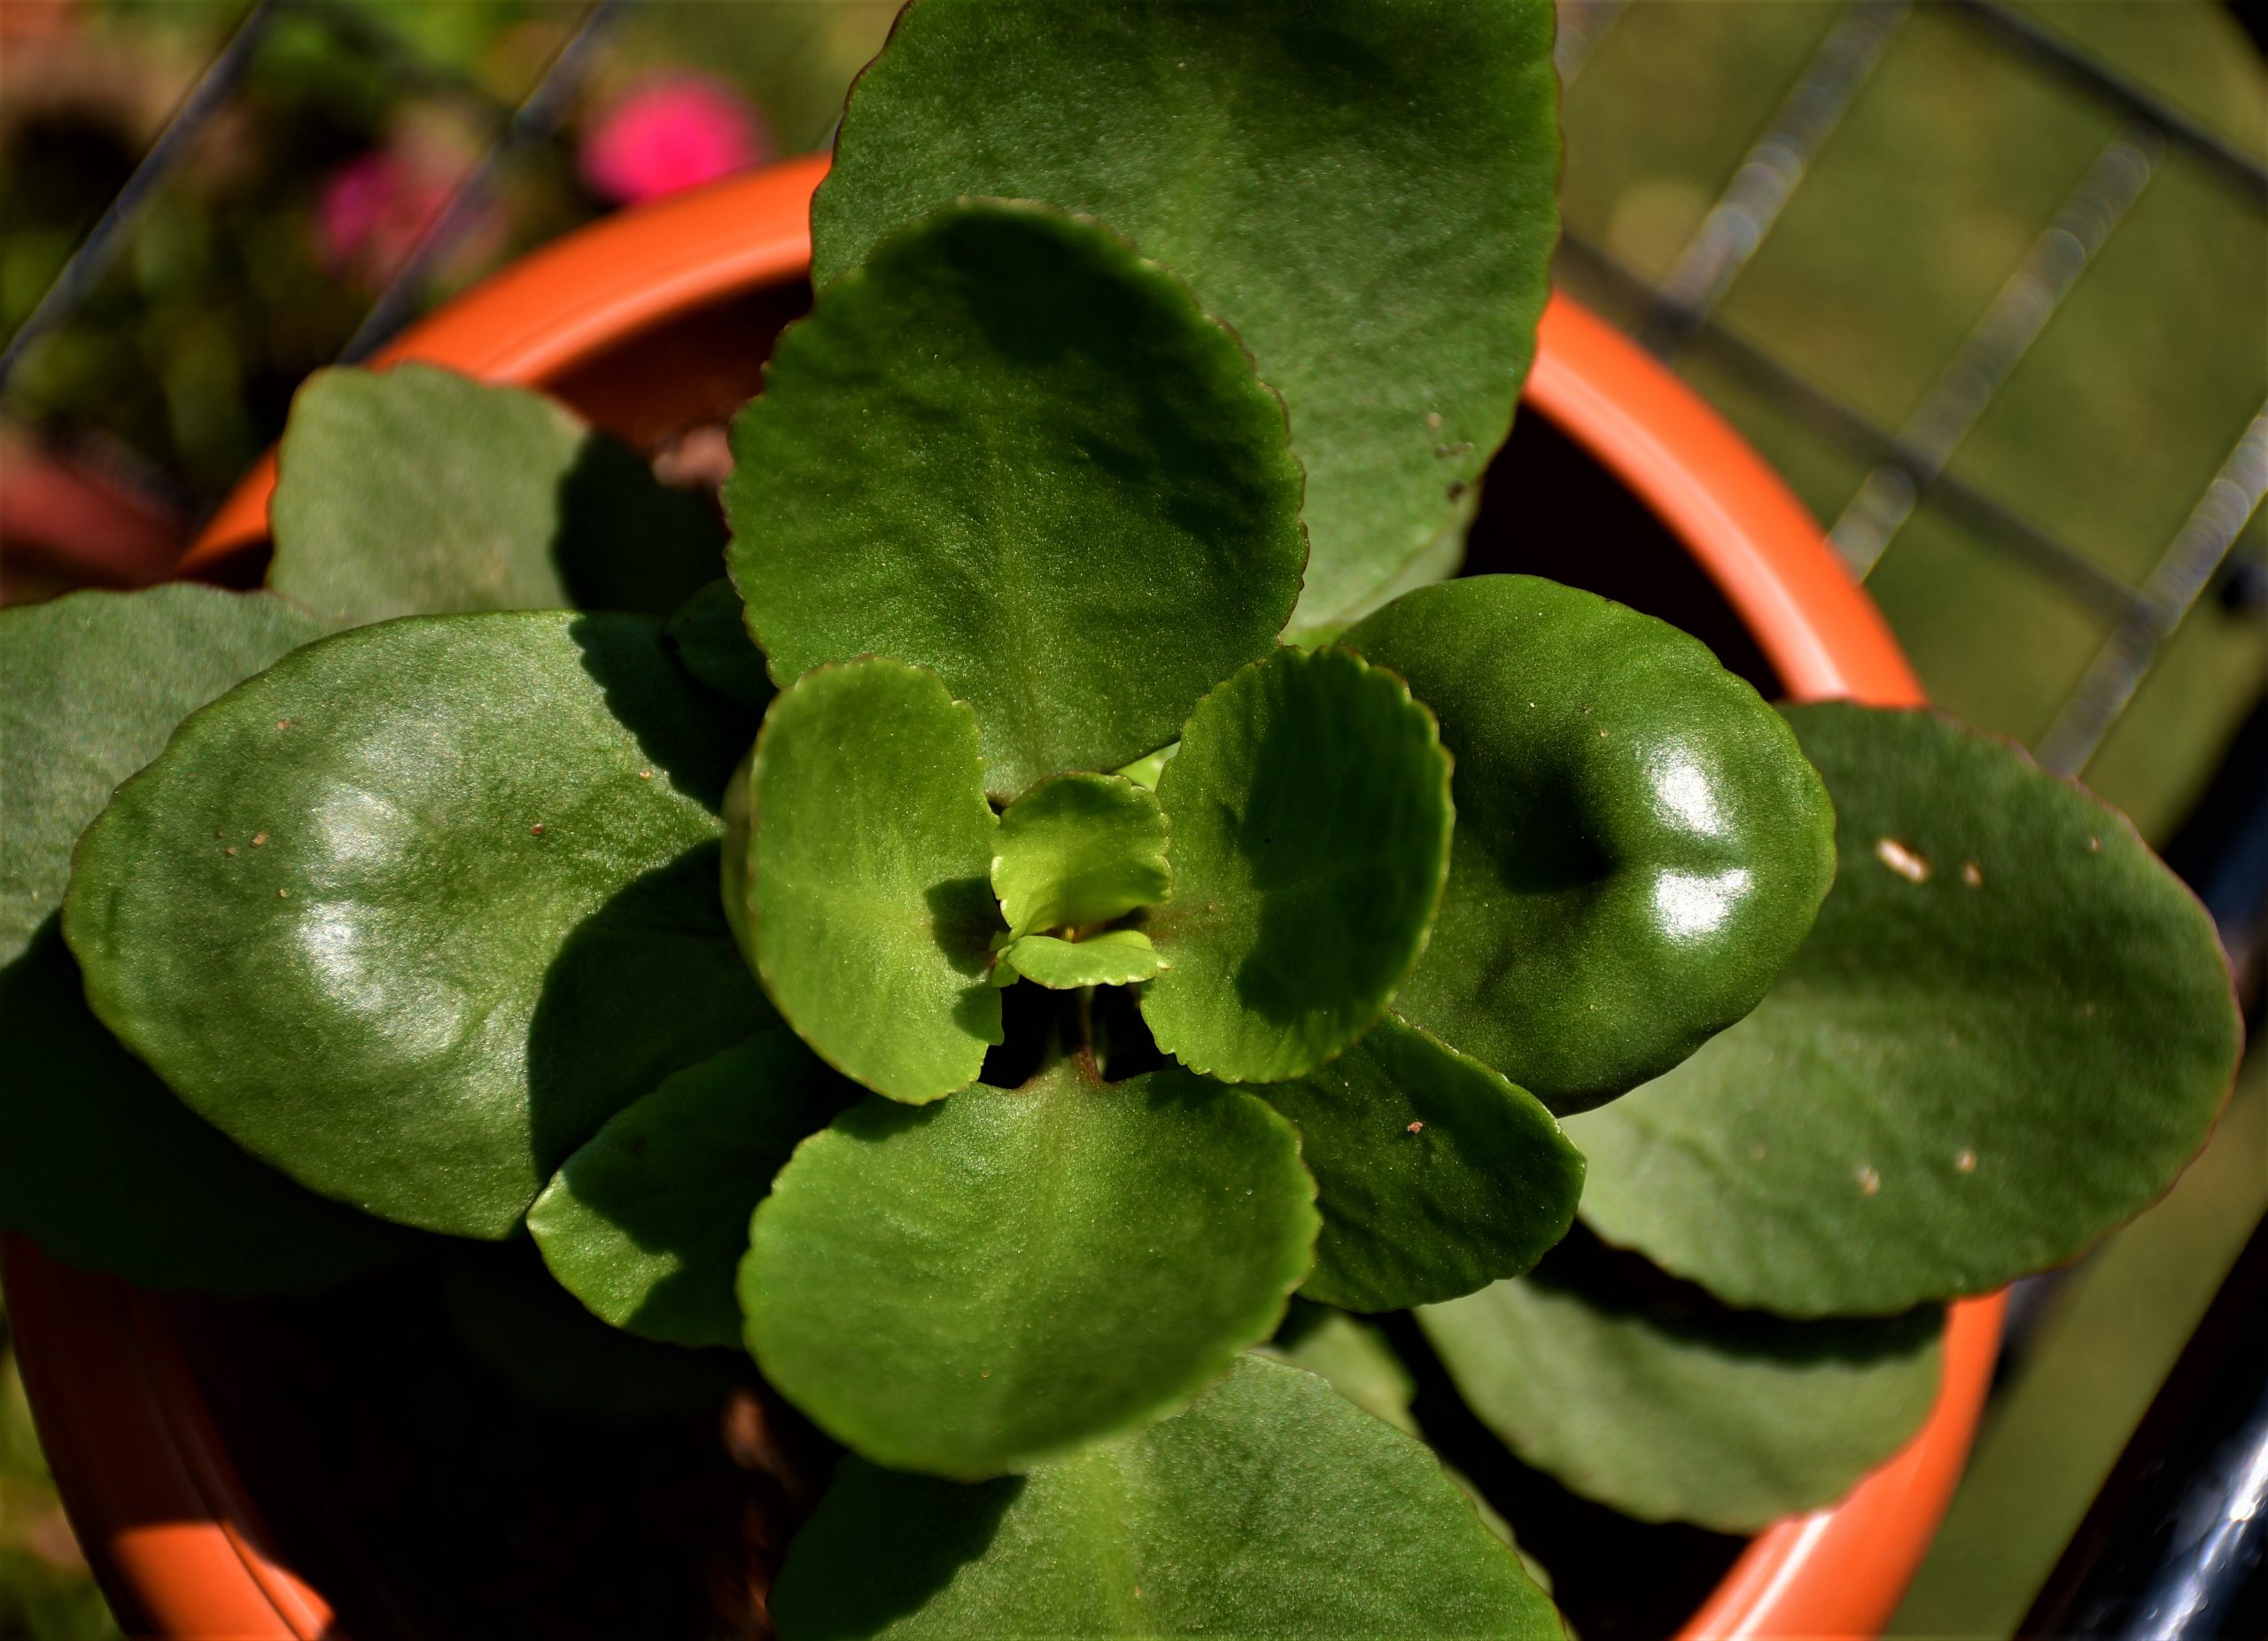 Leaves of Kalanchoe plant